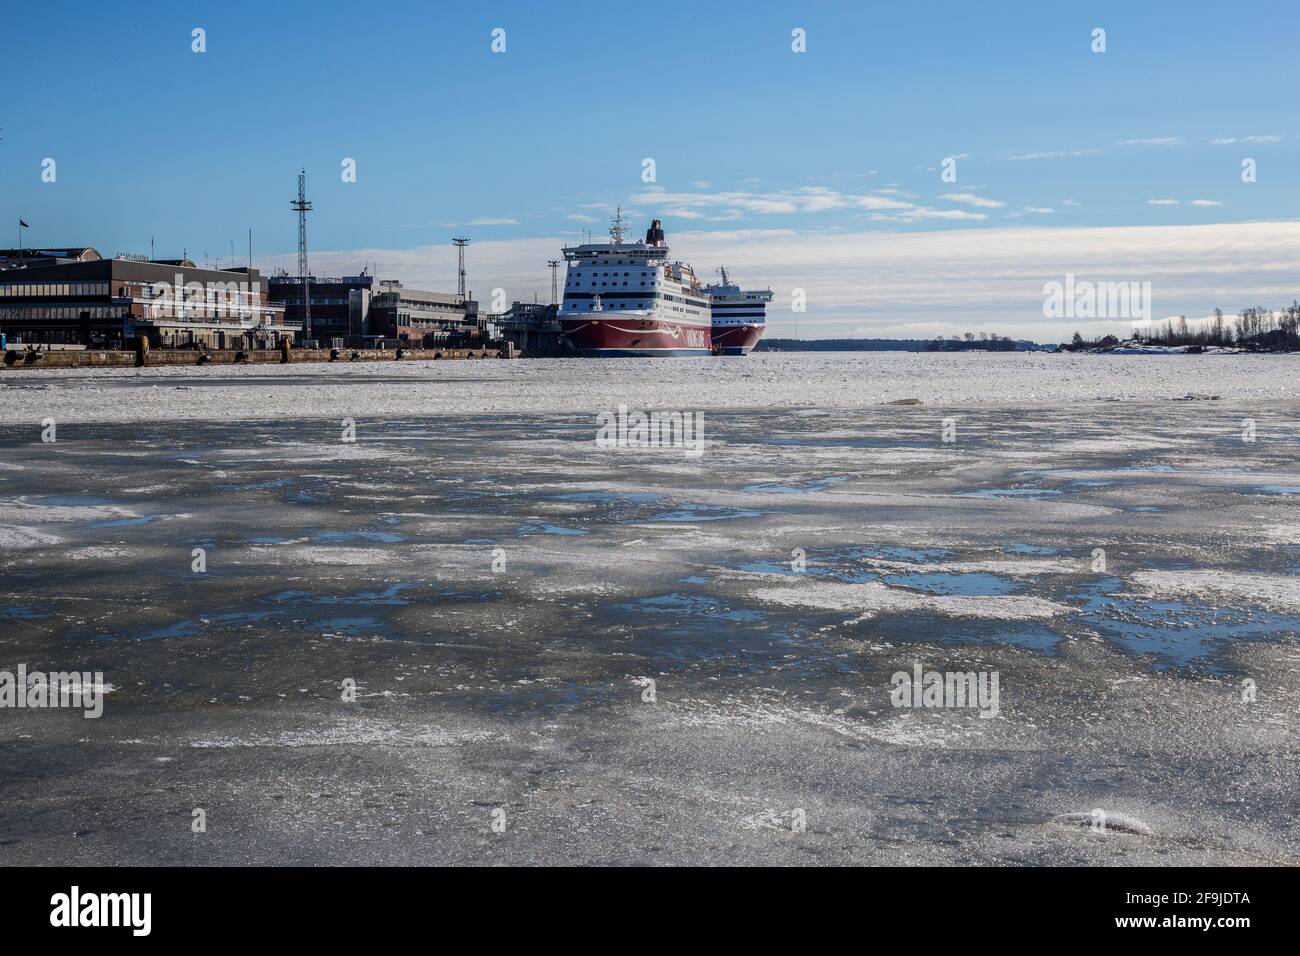 Helsinki, Finland - March 11, 2017: View of a Ship in South Harbour on a Sunny Day Stock Photo